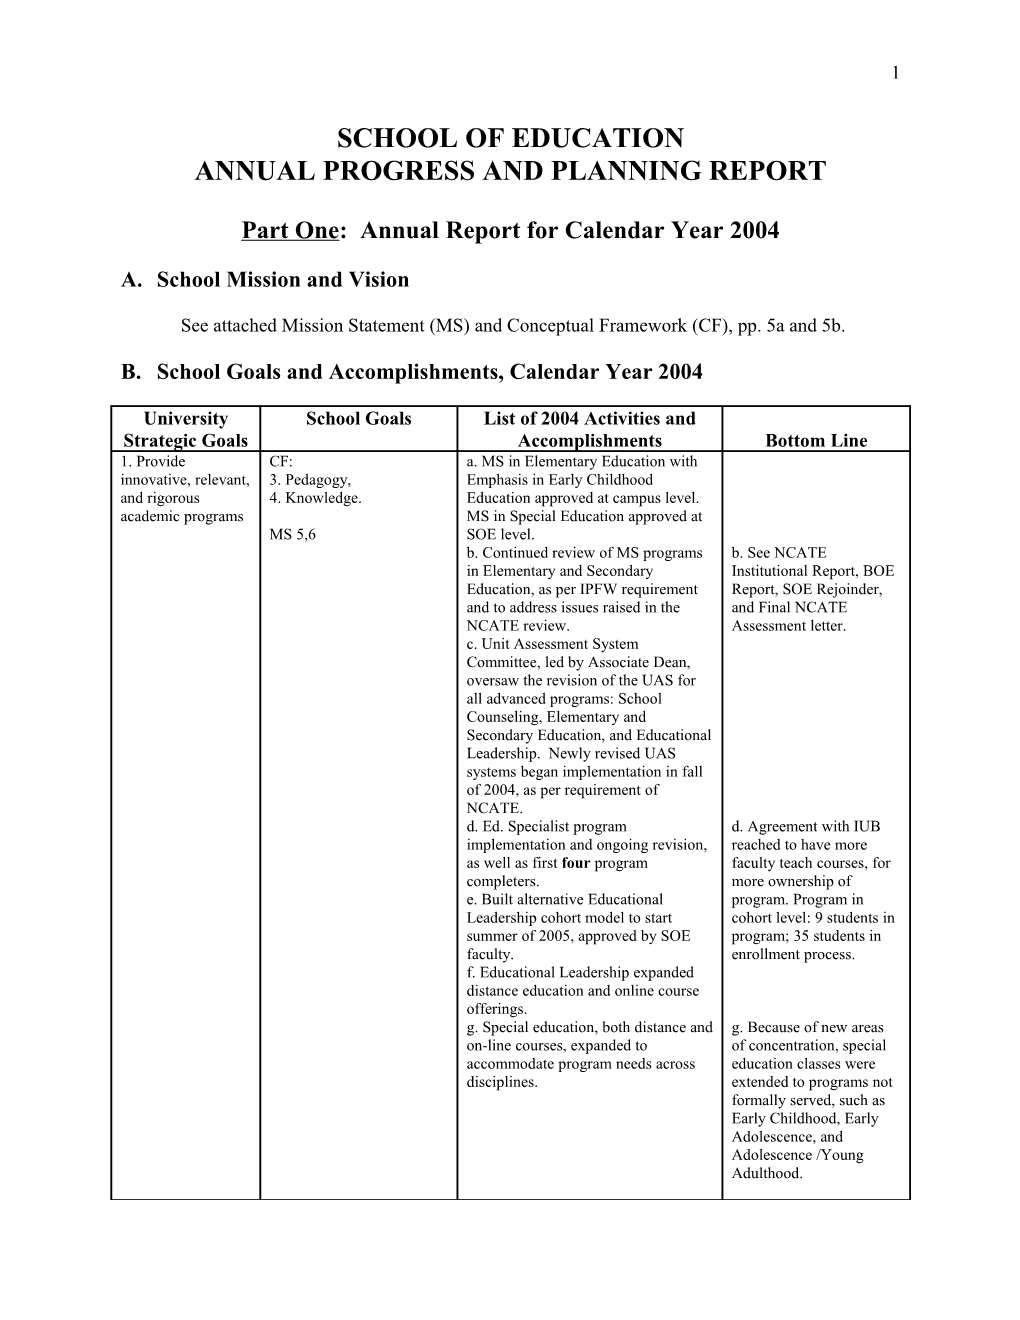 Annual Accomplishment and Planning Report